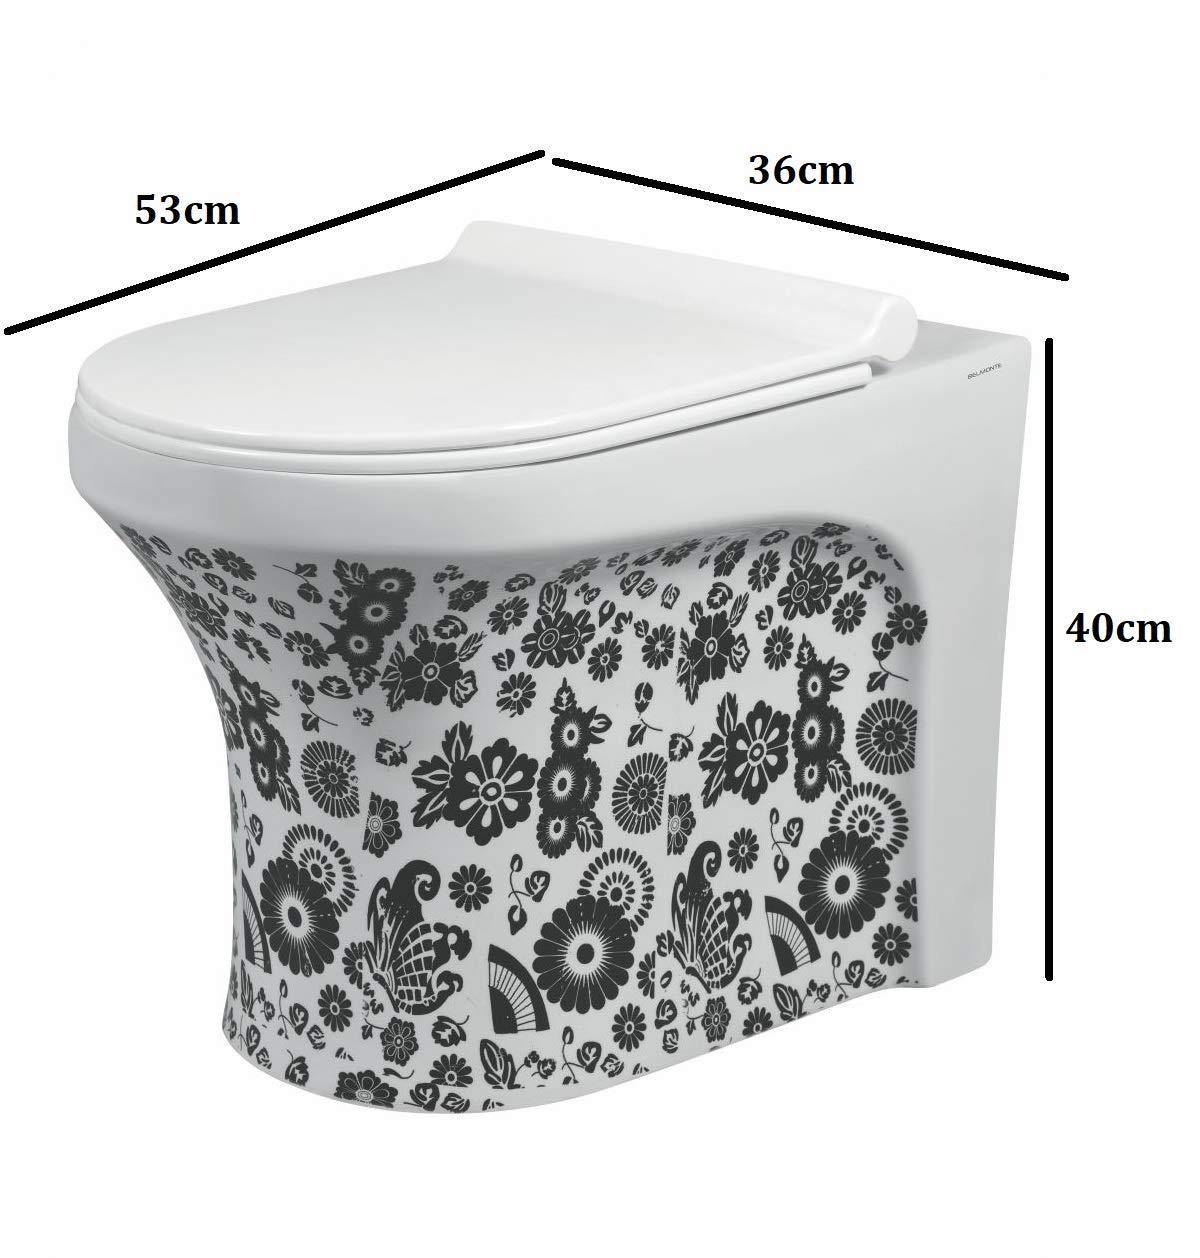 Ceramic Floor Mounted European Water Closet S Trap One Piece Western Toilet Commode with Soft Close Seat OUTLET IS FROM FLOOR 53 x 36 x 40 cm (White Black) - Bath Outlet